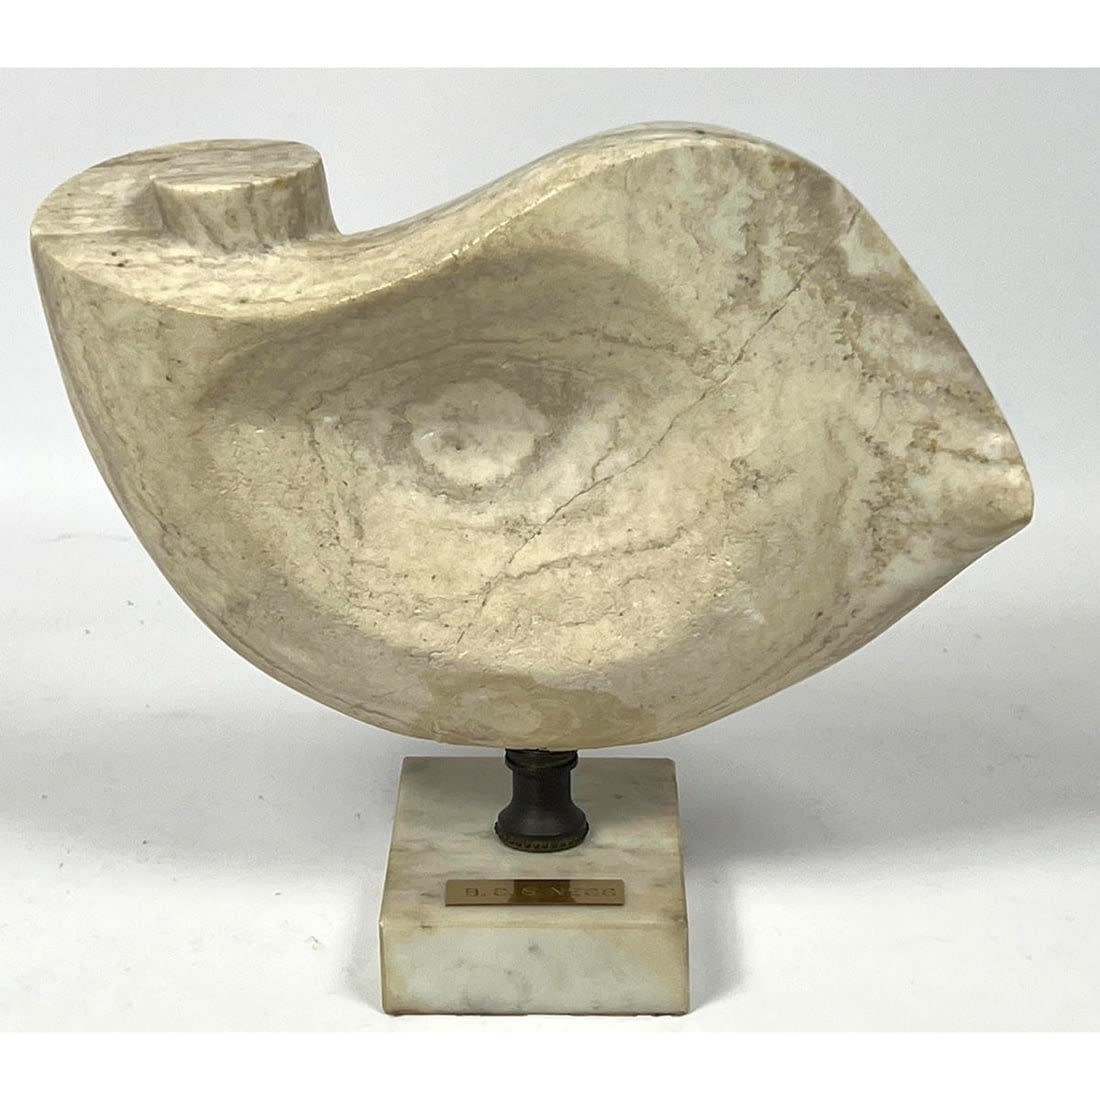 B S S NESS Carved Abstract Modernist 362950